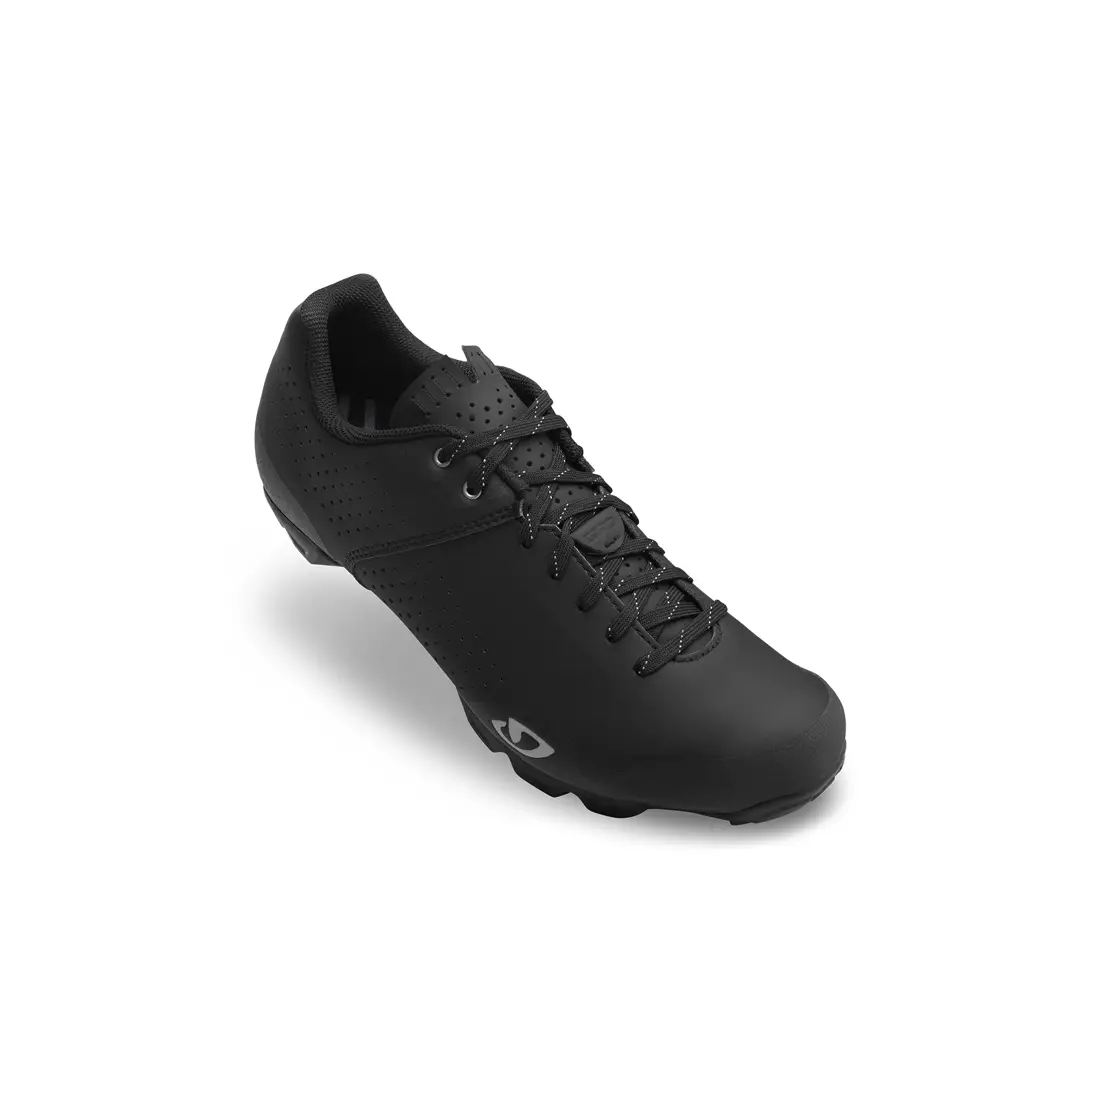 Men's bicycle boots  GIRO PRIVATEER LACE black 